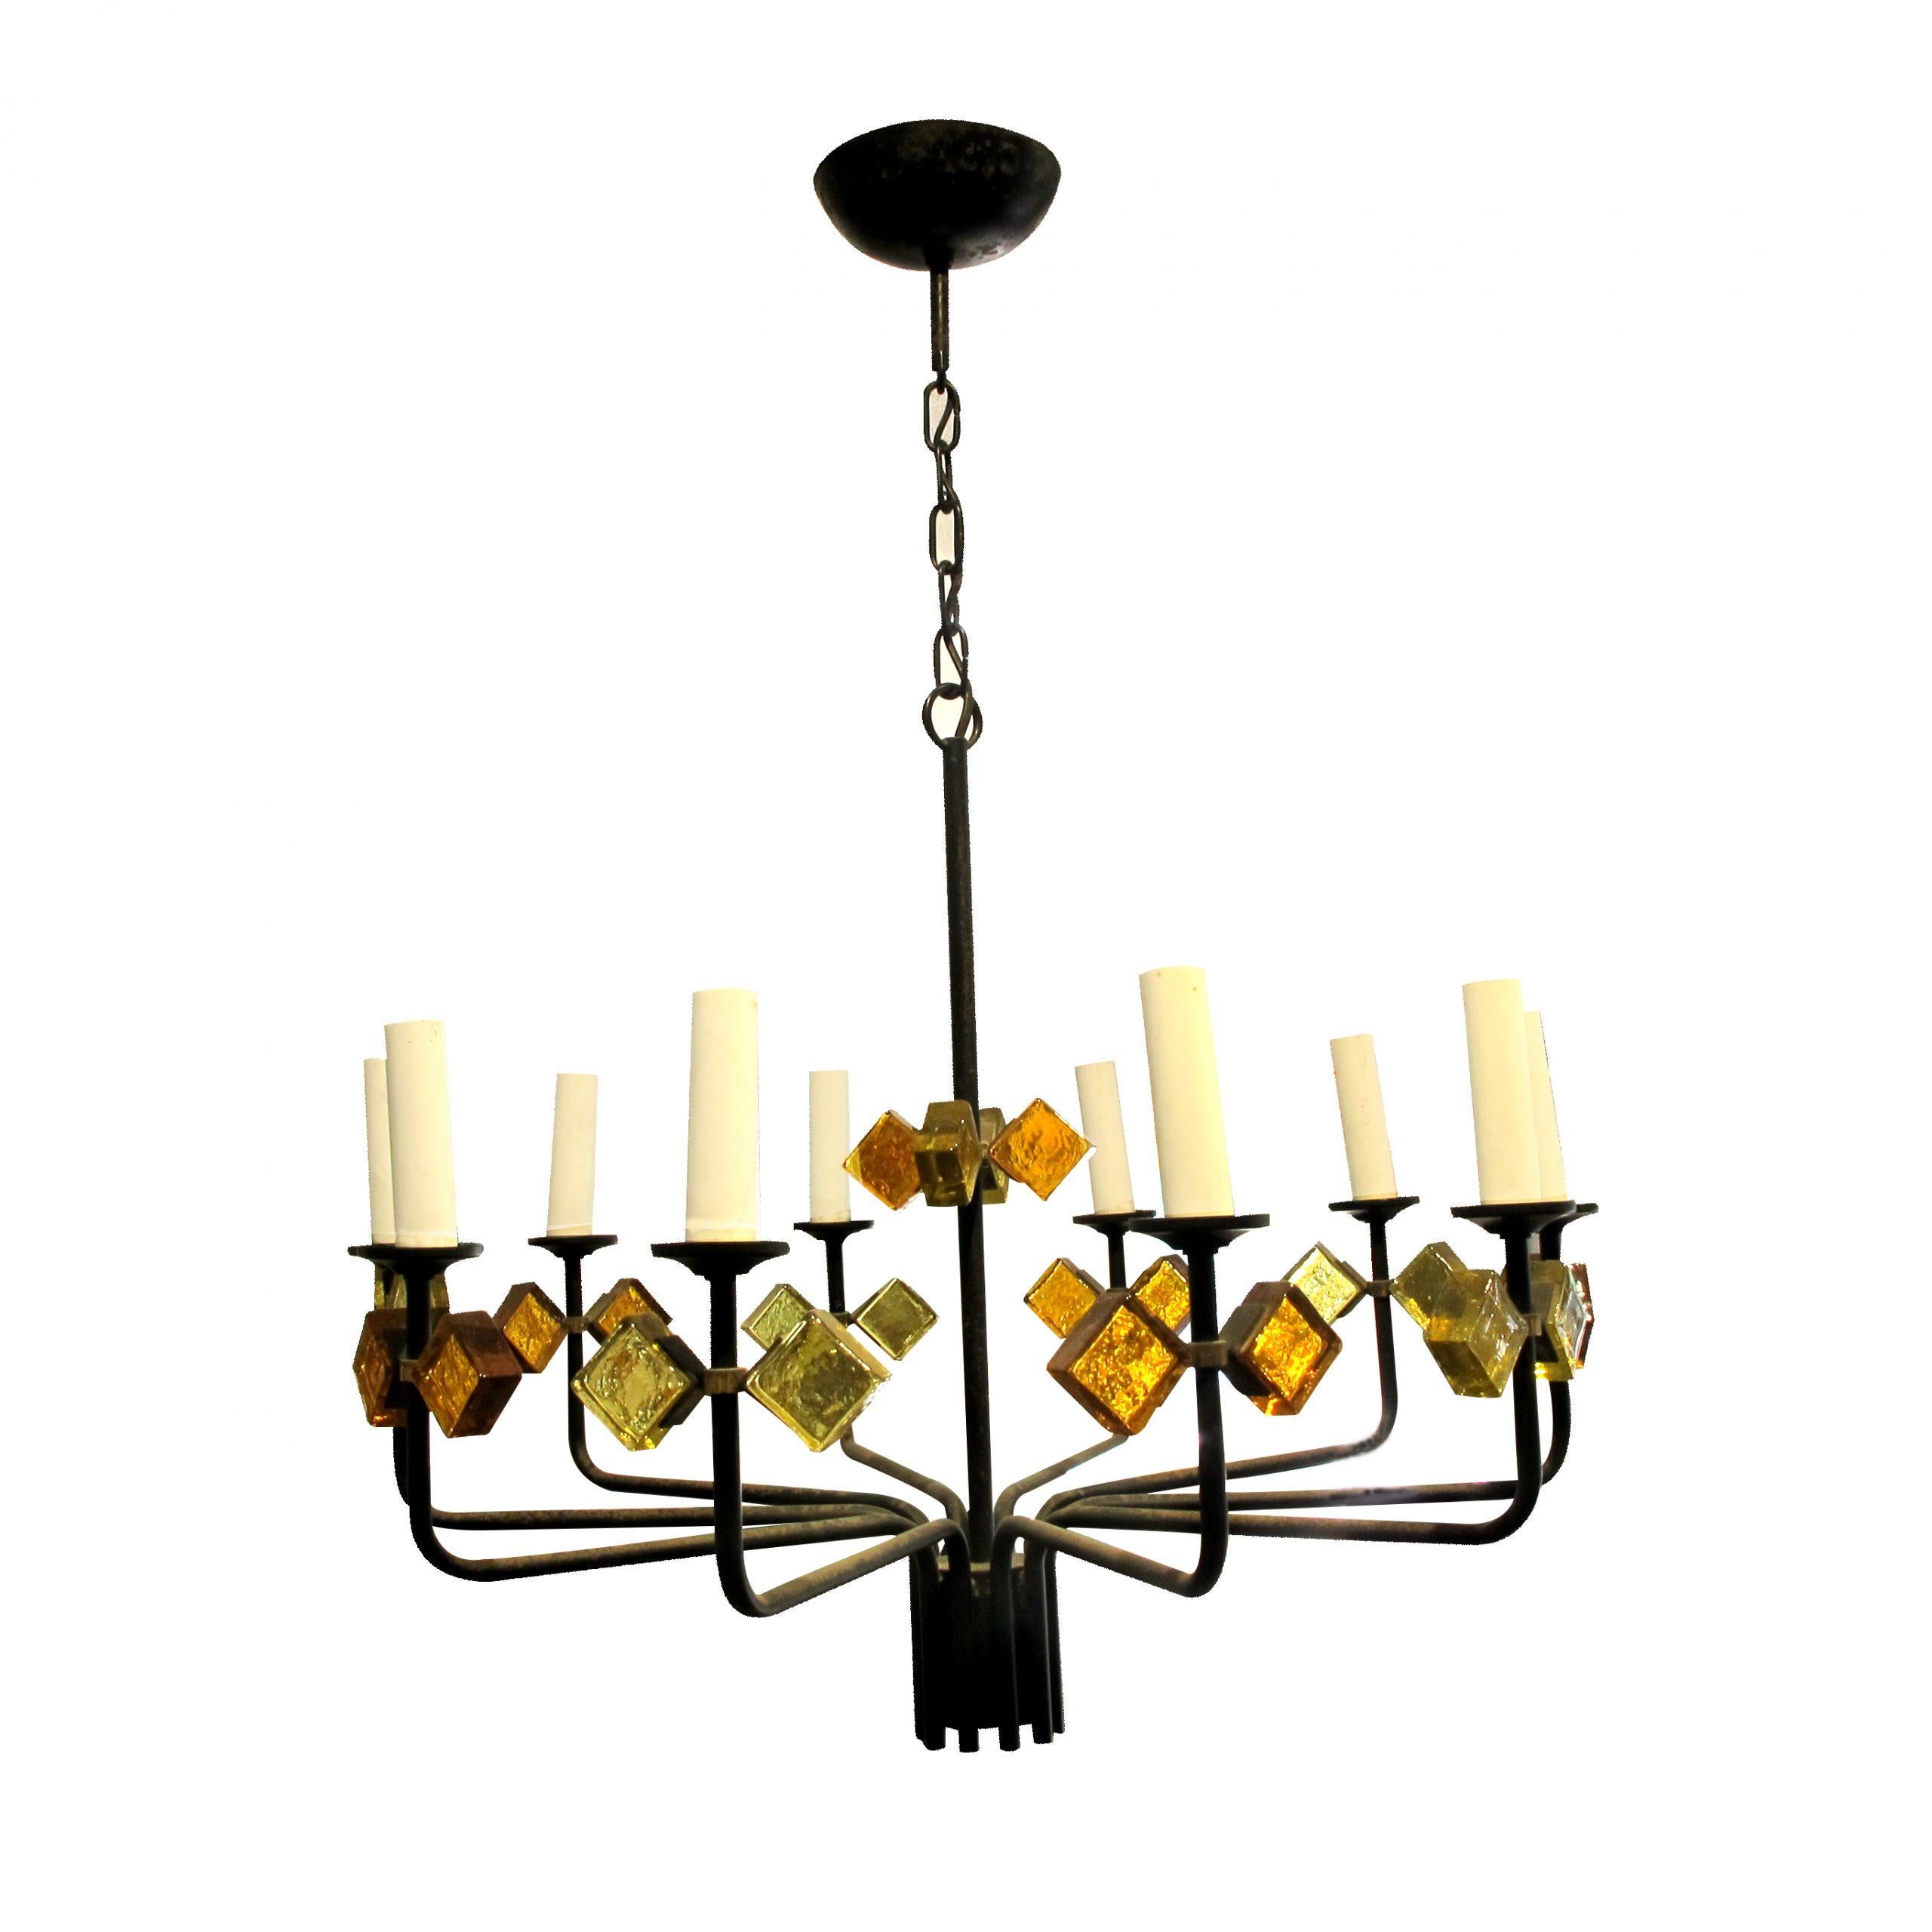 This a pair of mid-century chandeliers with yellow, amber glass and black painted frame made by Svend Aage Holm Sorensen for Holm Sorensen and Co. Each chandelier presents 10 branches fitted with E14 small screw sockets.

Size: H80 cm x Diameter 55